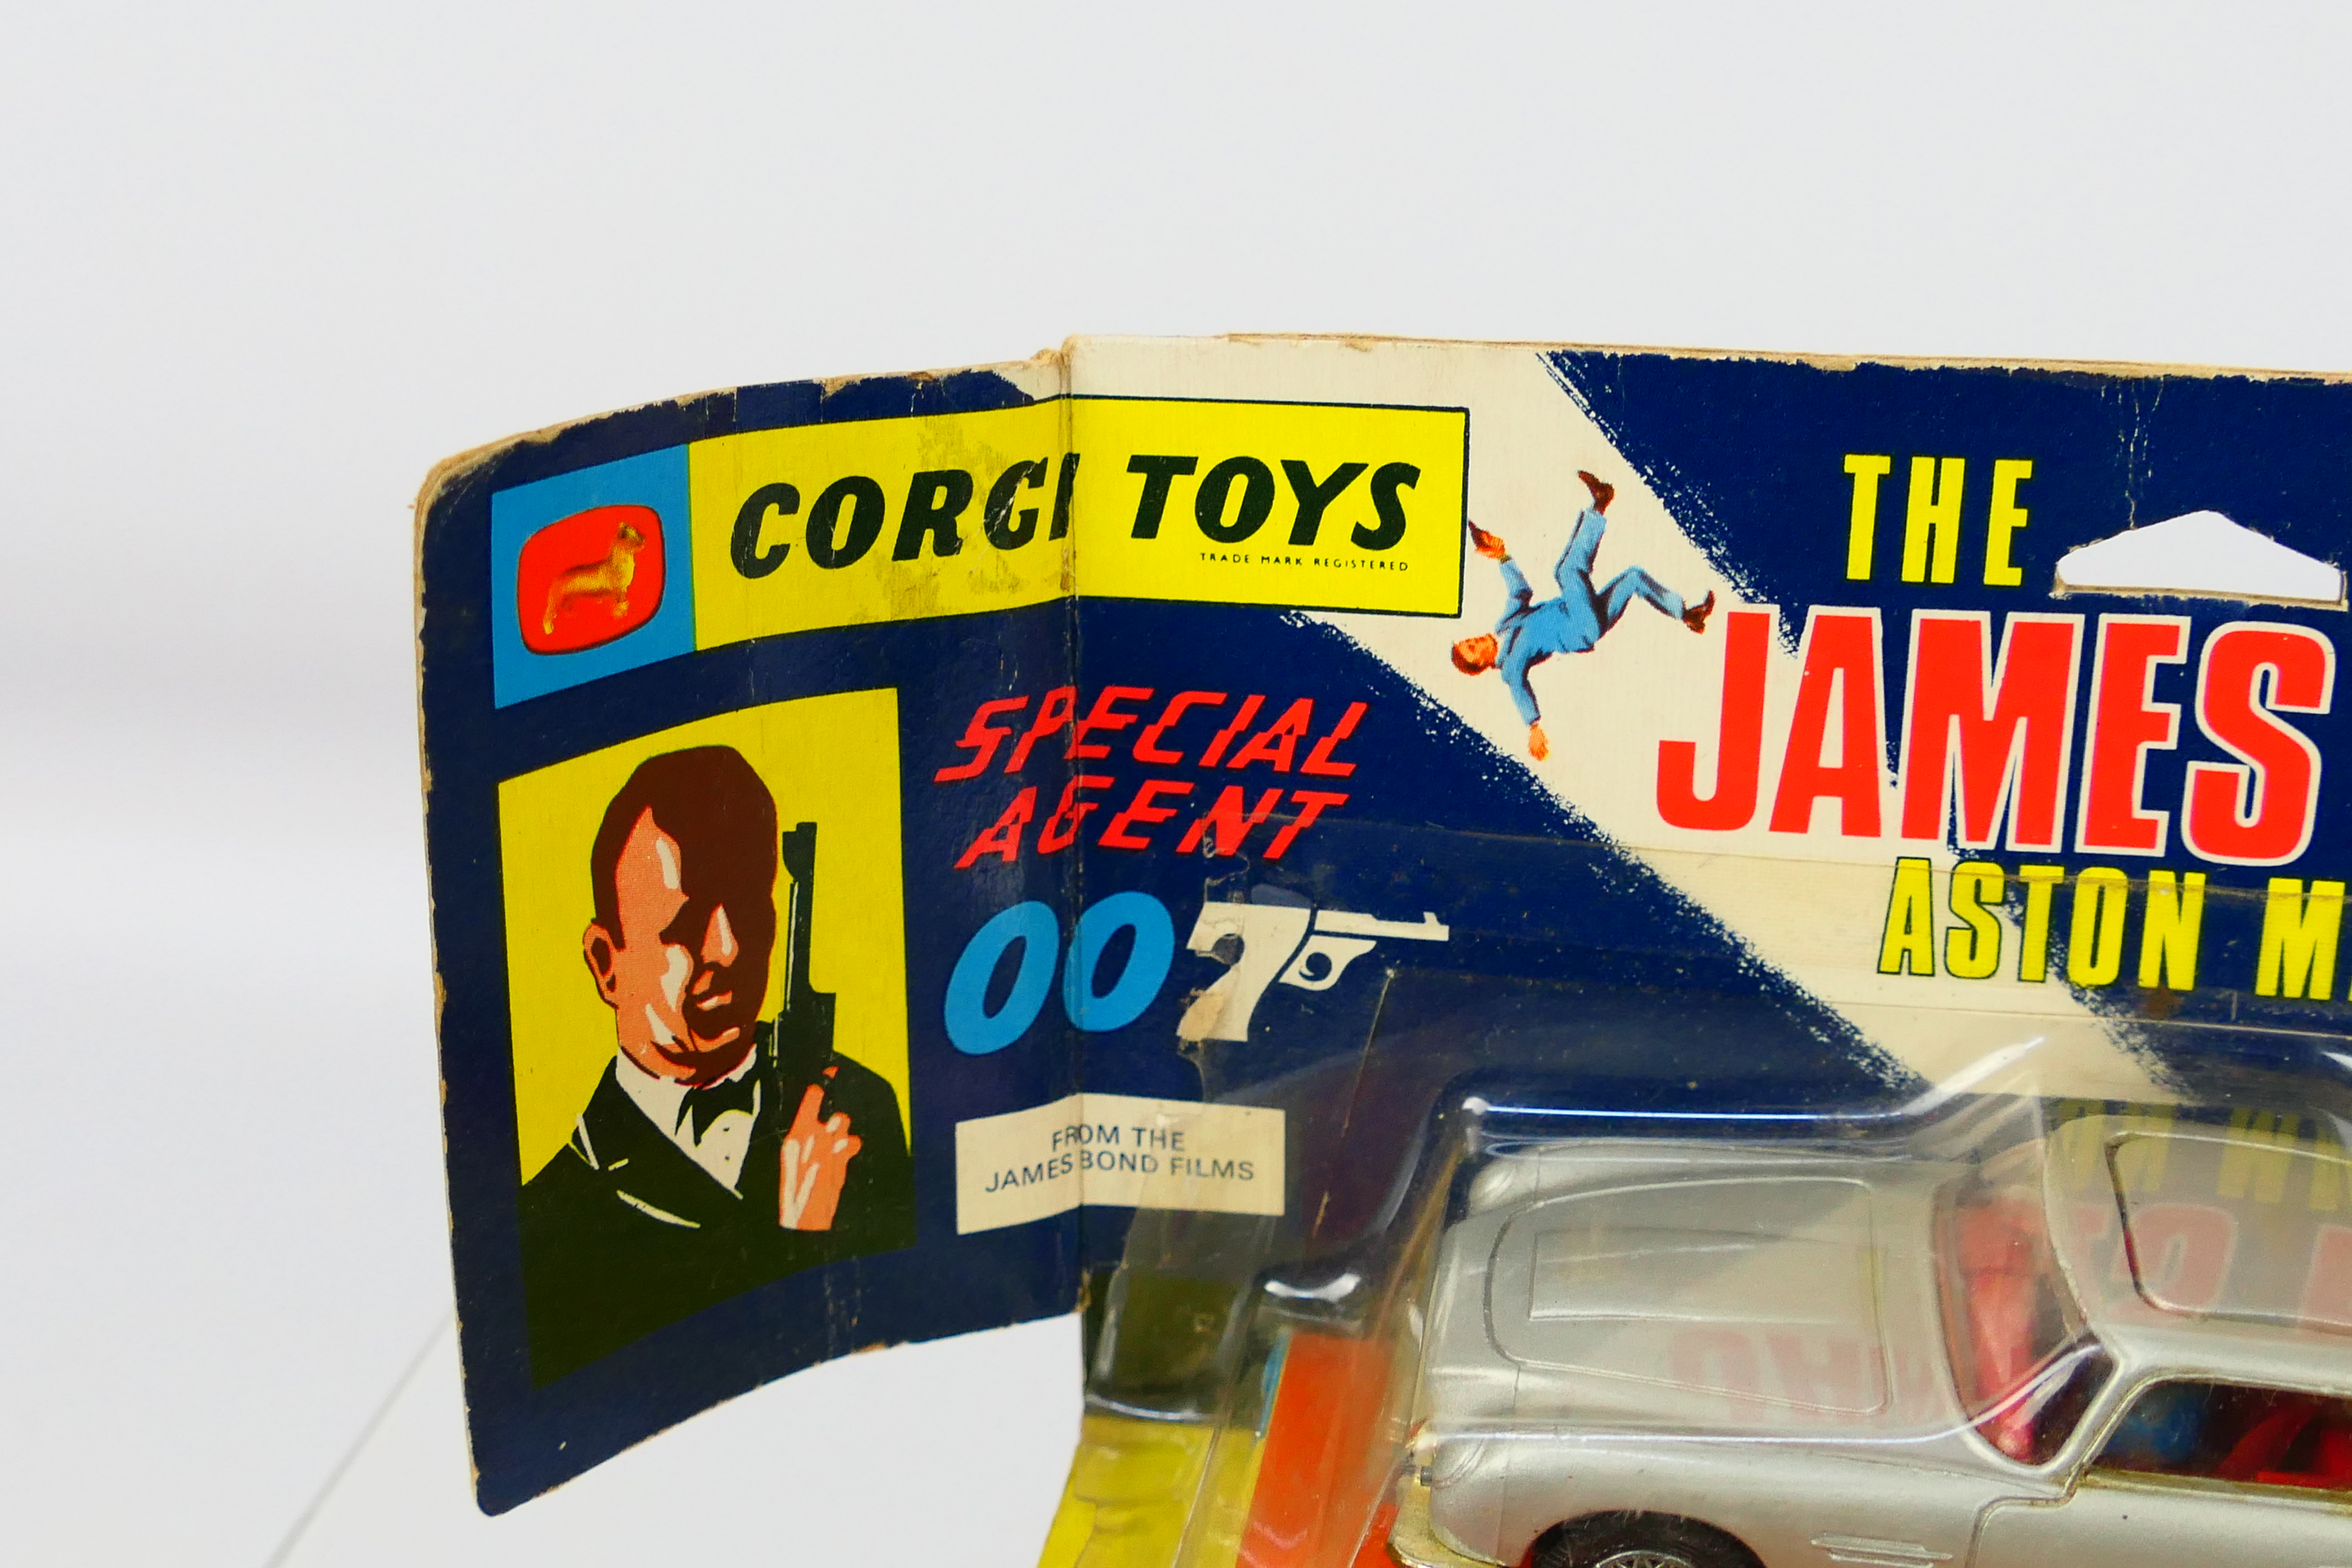 Corgi - James Bond - An unopened 007 Aston Martin DB5 in the early pictorial wing flap packaging # - Image 4 of 8